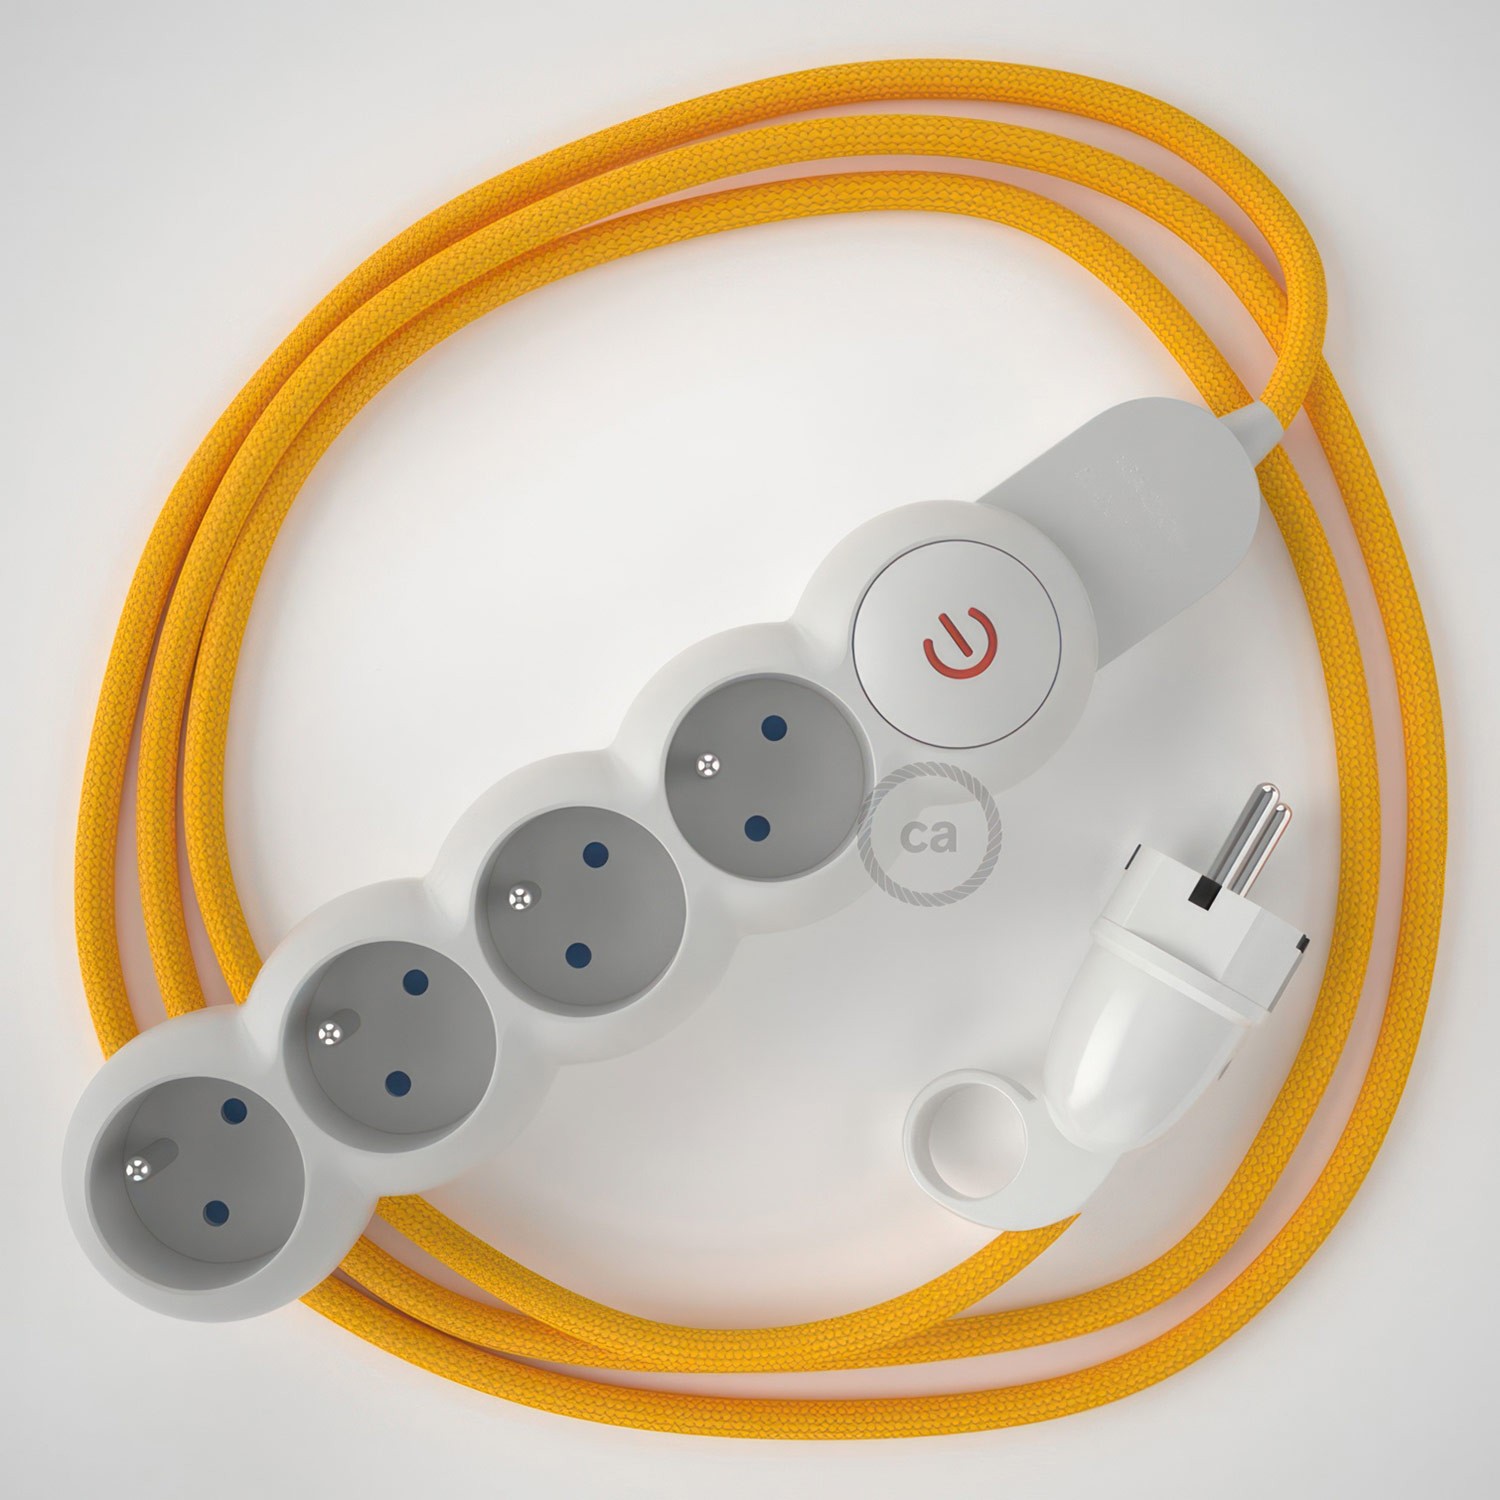 French Power Strip with electrical cable covered in rayon Yellow fabric RM10 and Schuko plug with confort ring